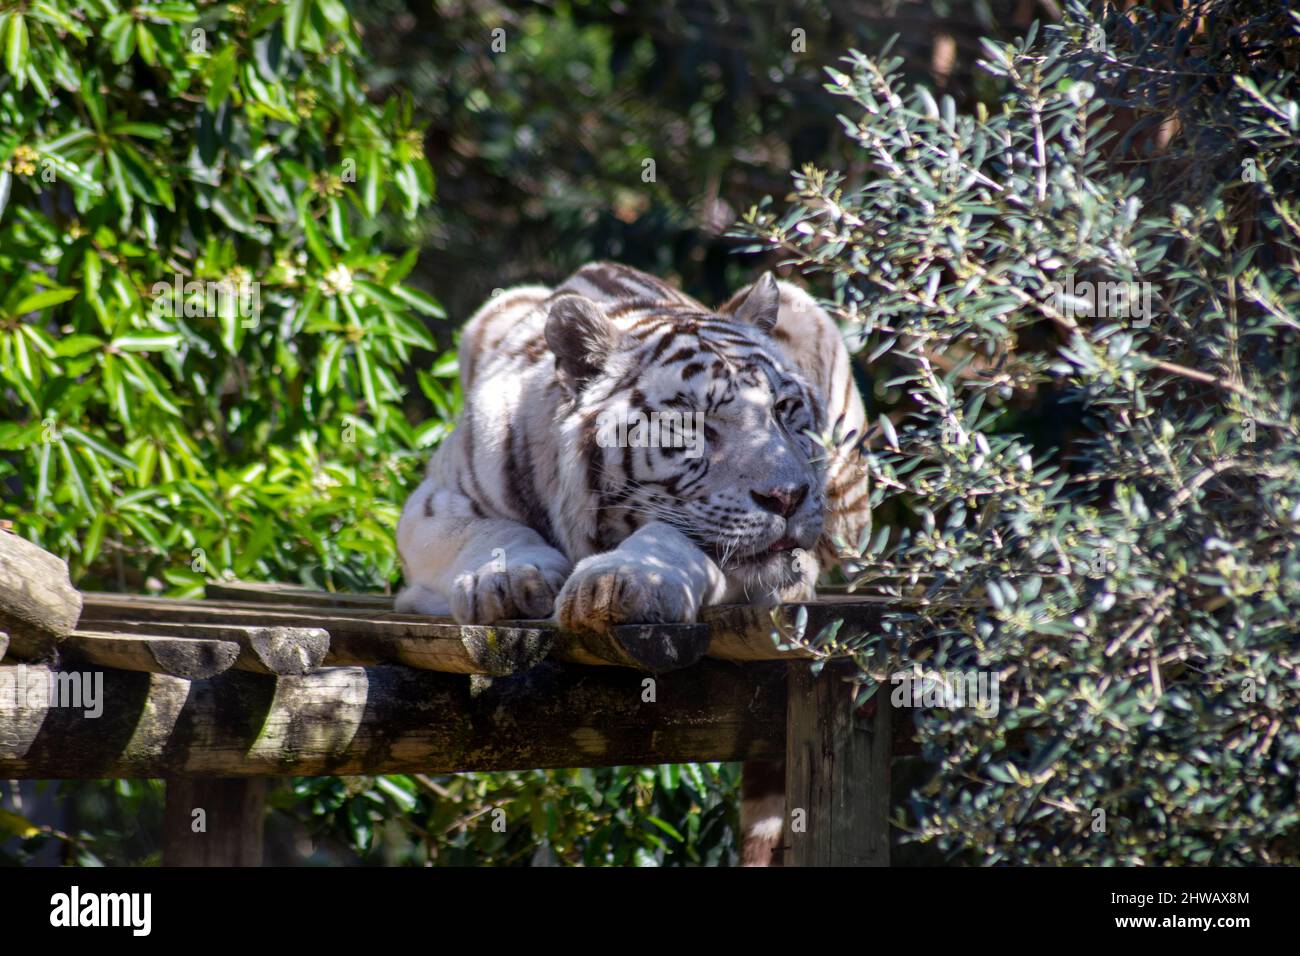 The white tiger or bleached tiger is a leucistic pigmentation variant of the Bengal tiger, Siberian tiger and hybrids between the two. Lisbon zoo. Stock Photo